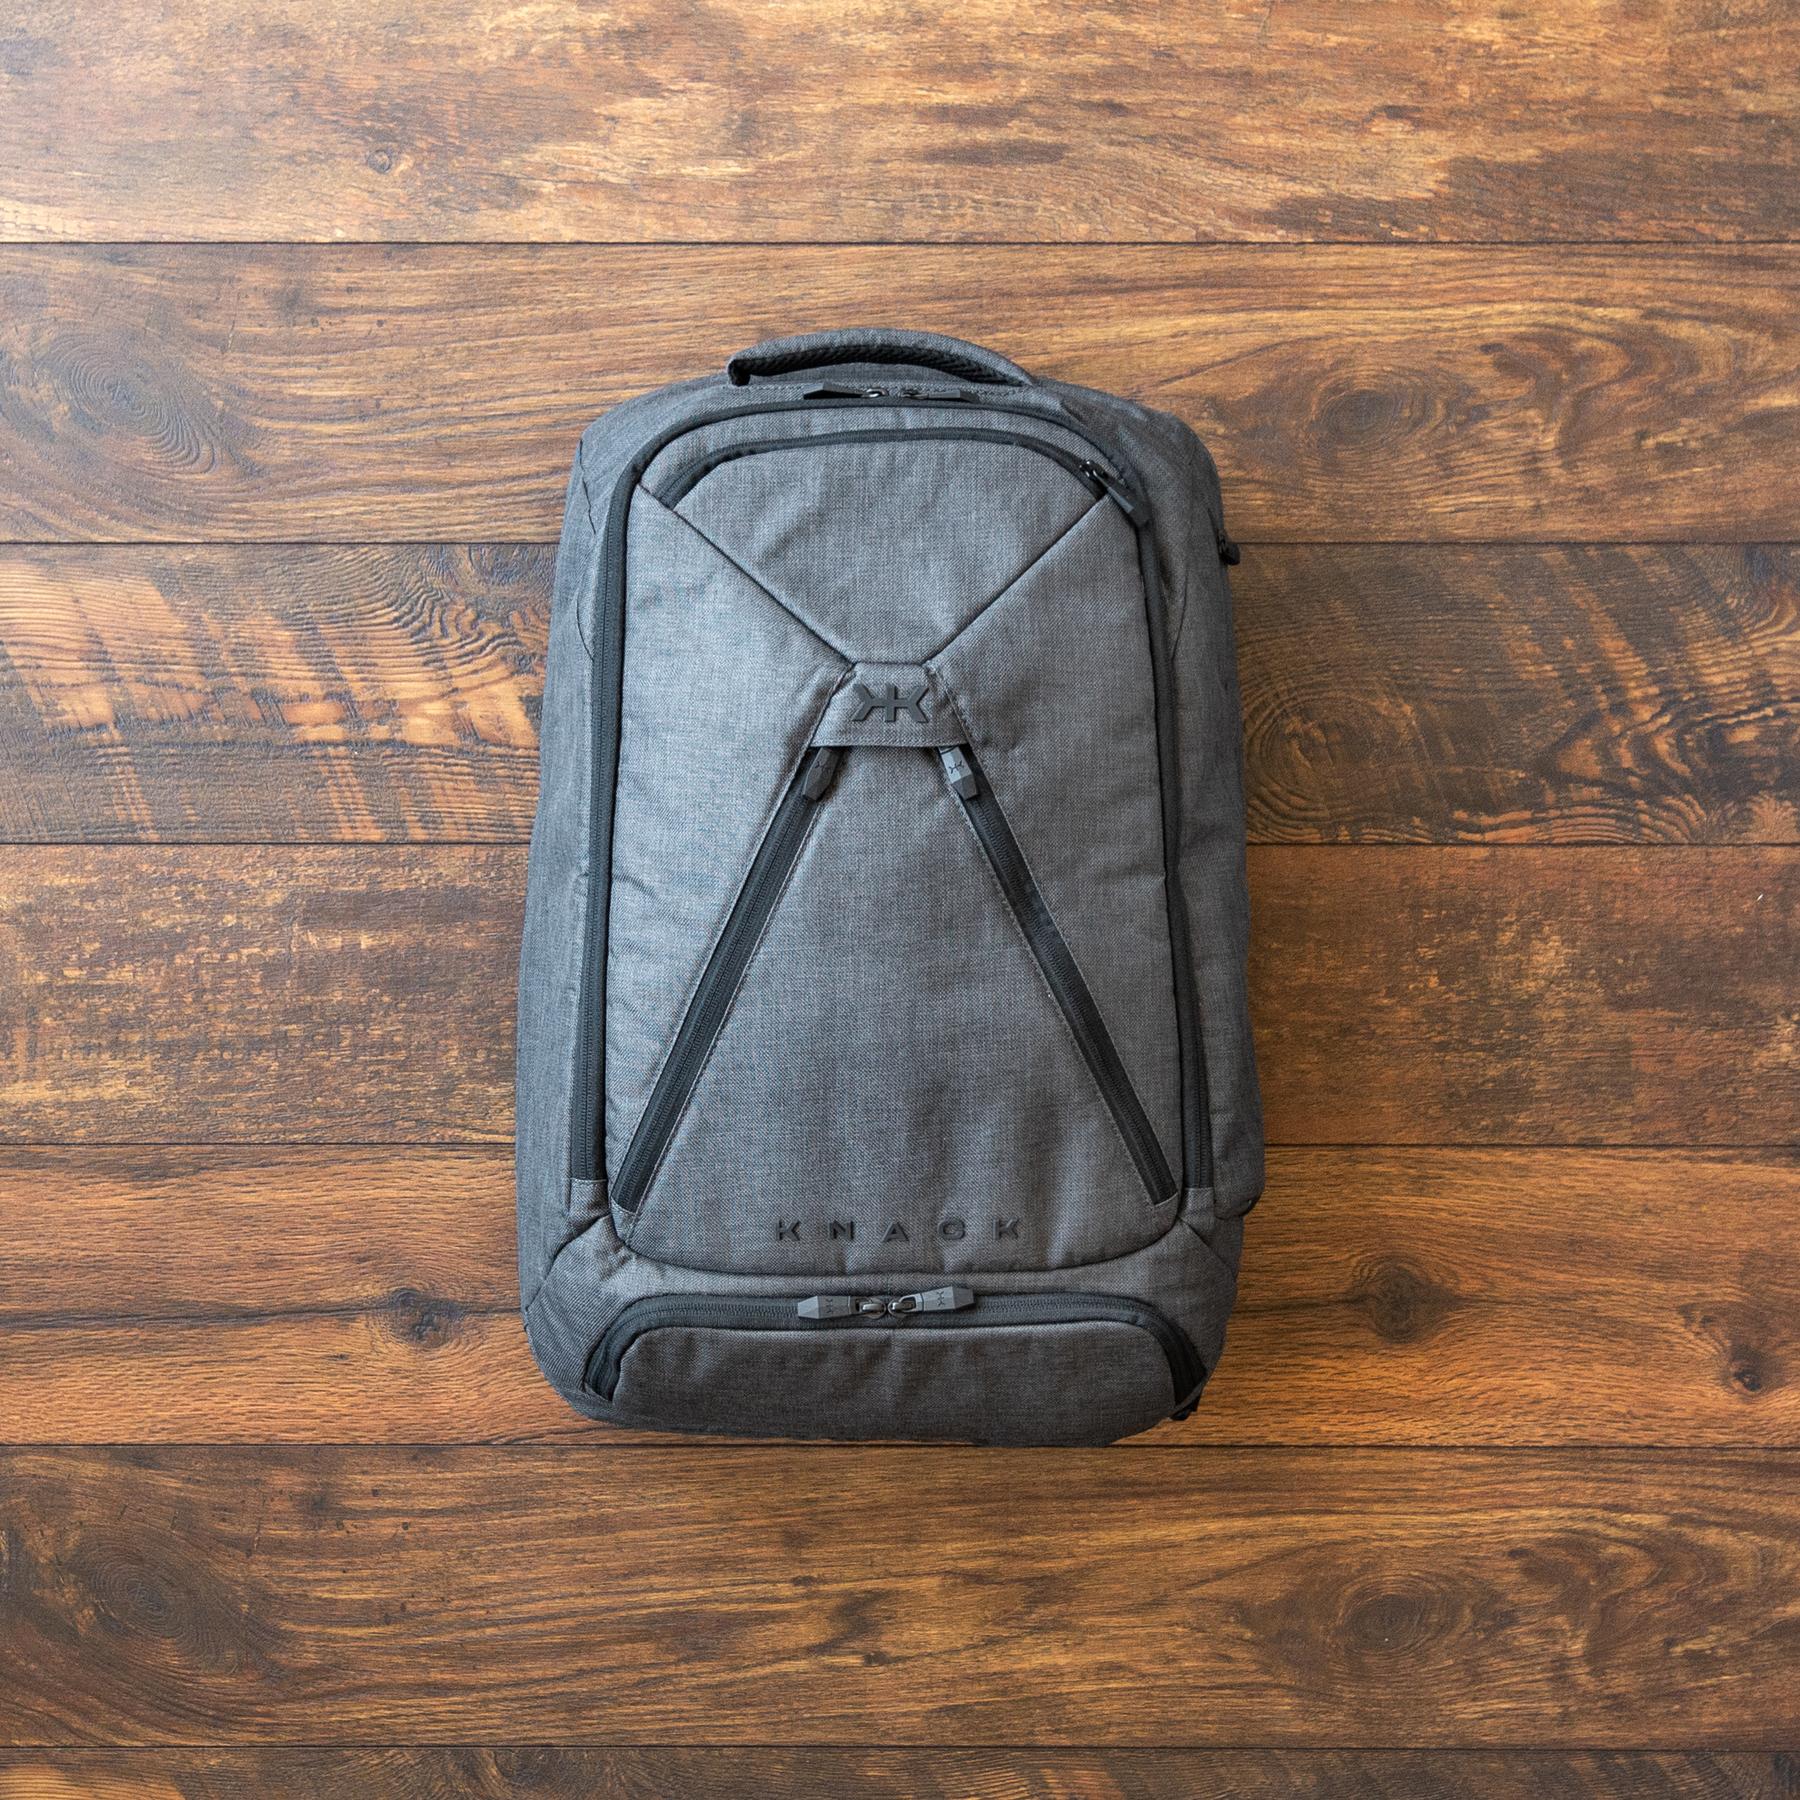 Fodor's Luggage Review: Knack's Medium Expandable Knackpack